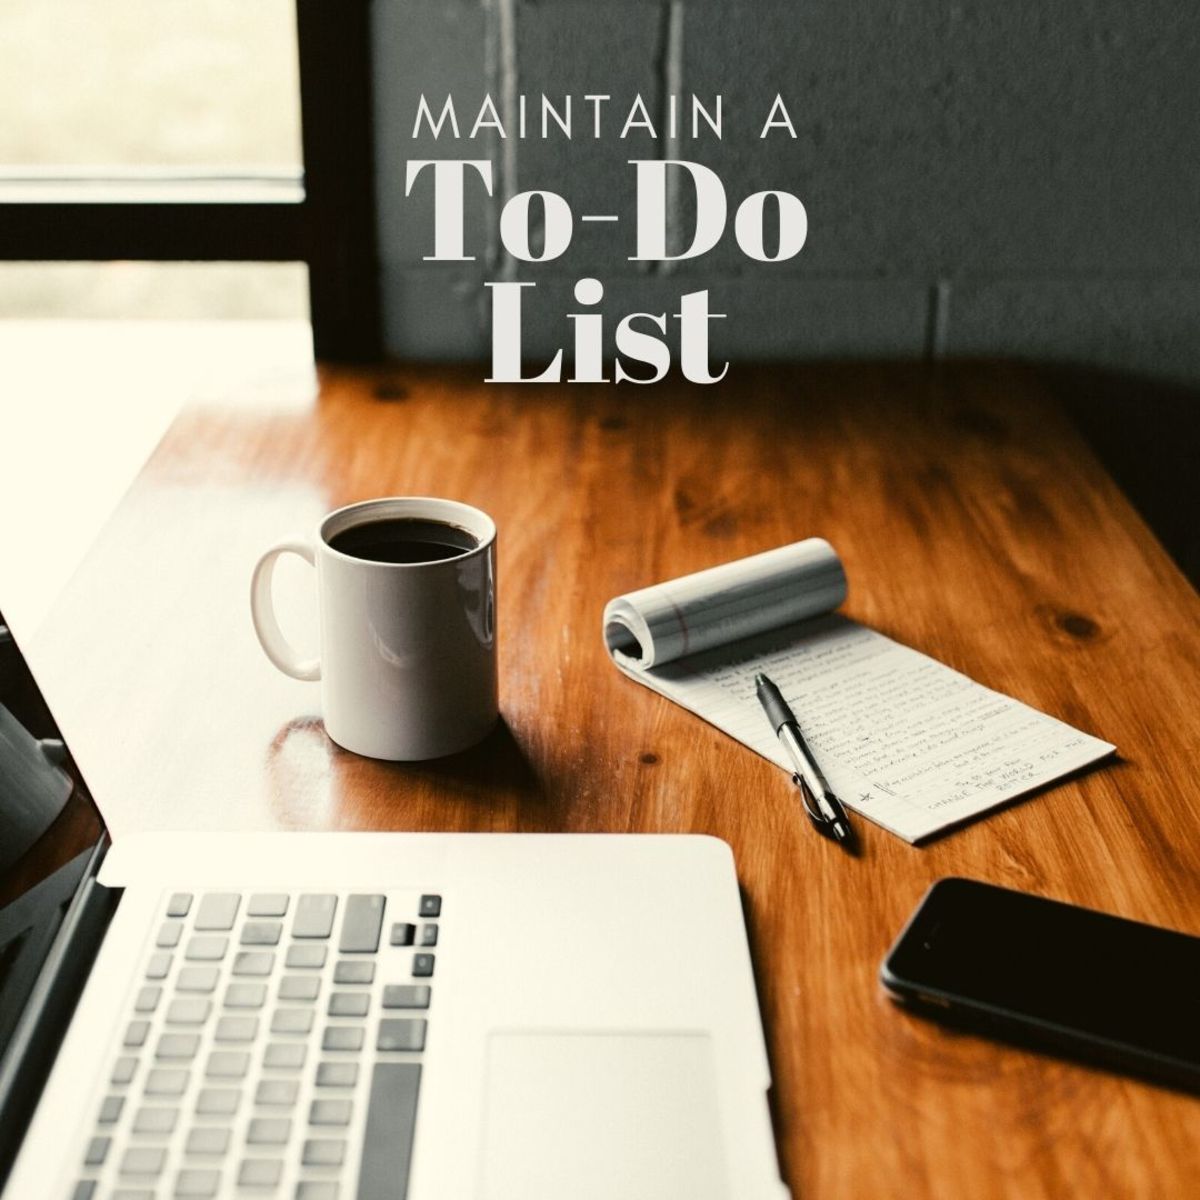 Organization is key—a well-thought-out to-do list will give you the structure you need to set goals and accomplish them.